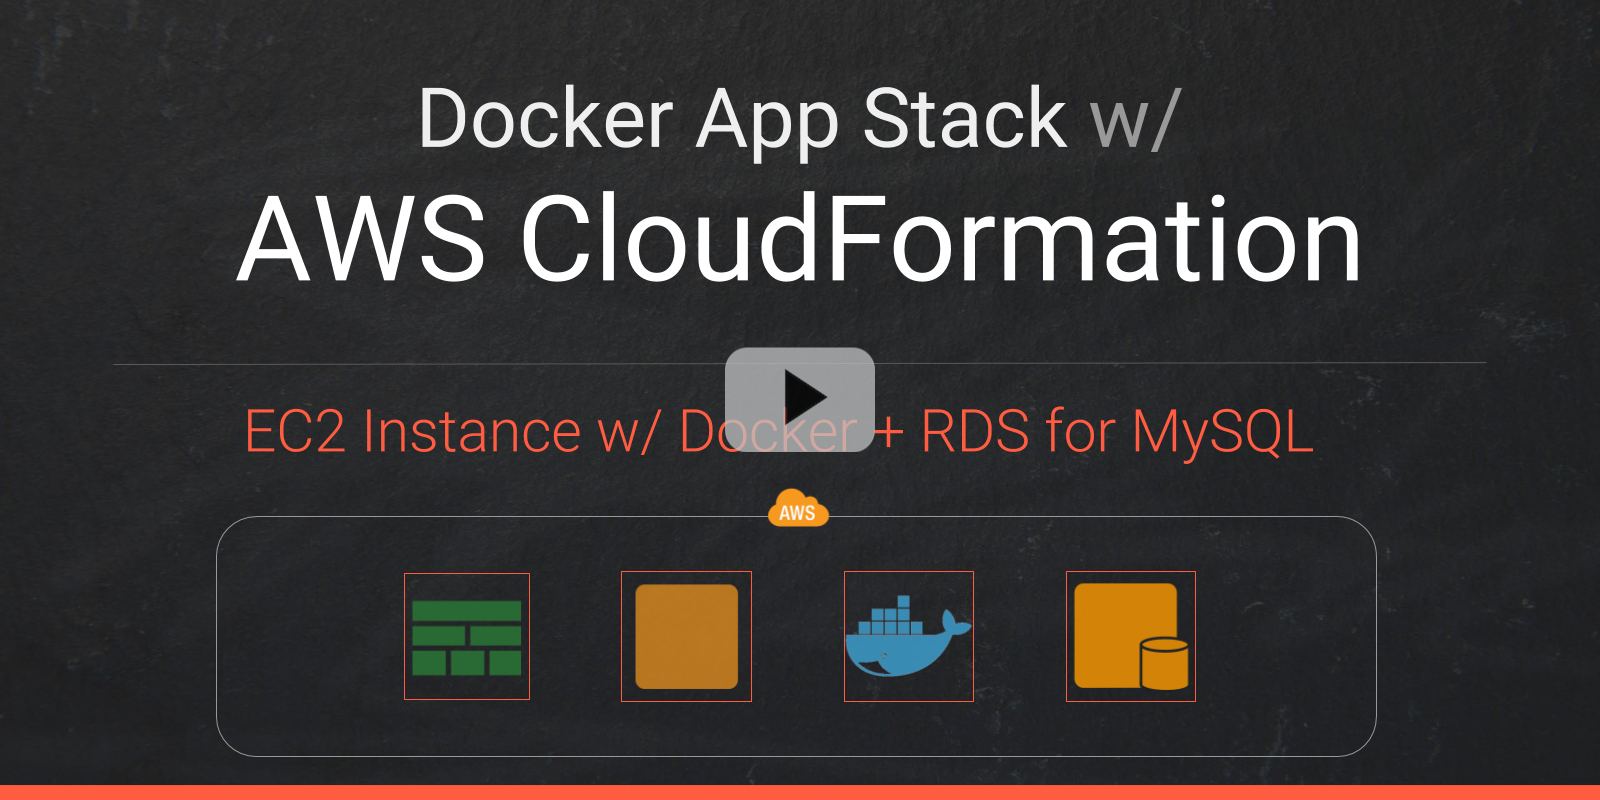 Create AWS CloudFormation Stack for EC2 & RDS and Deploy Docker App